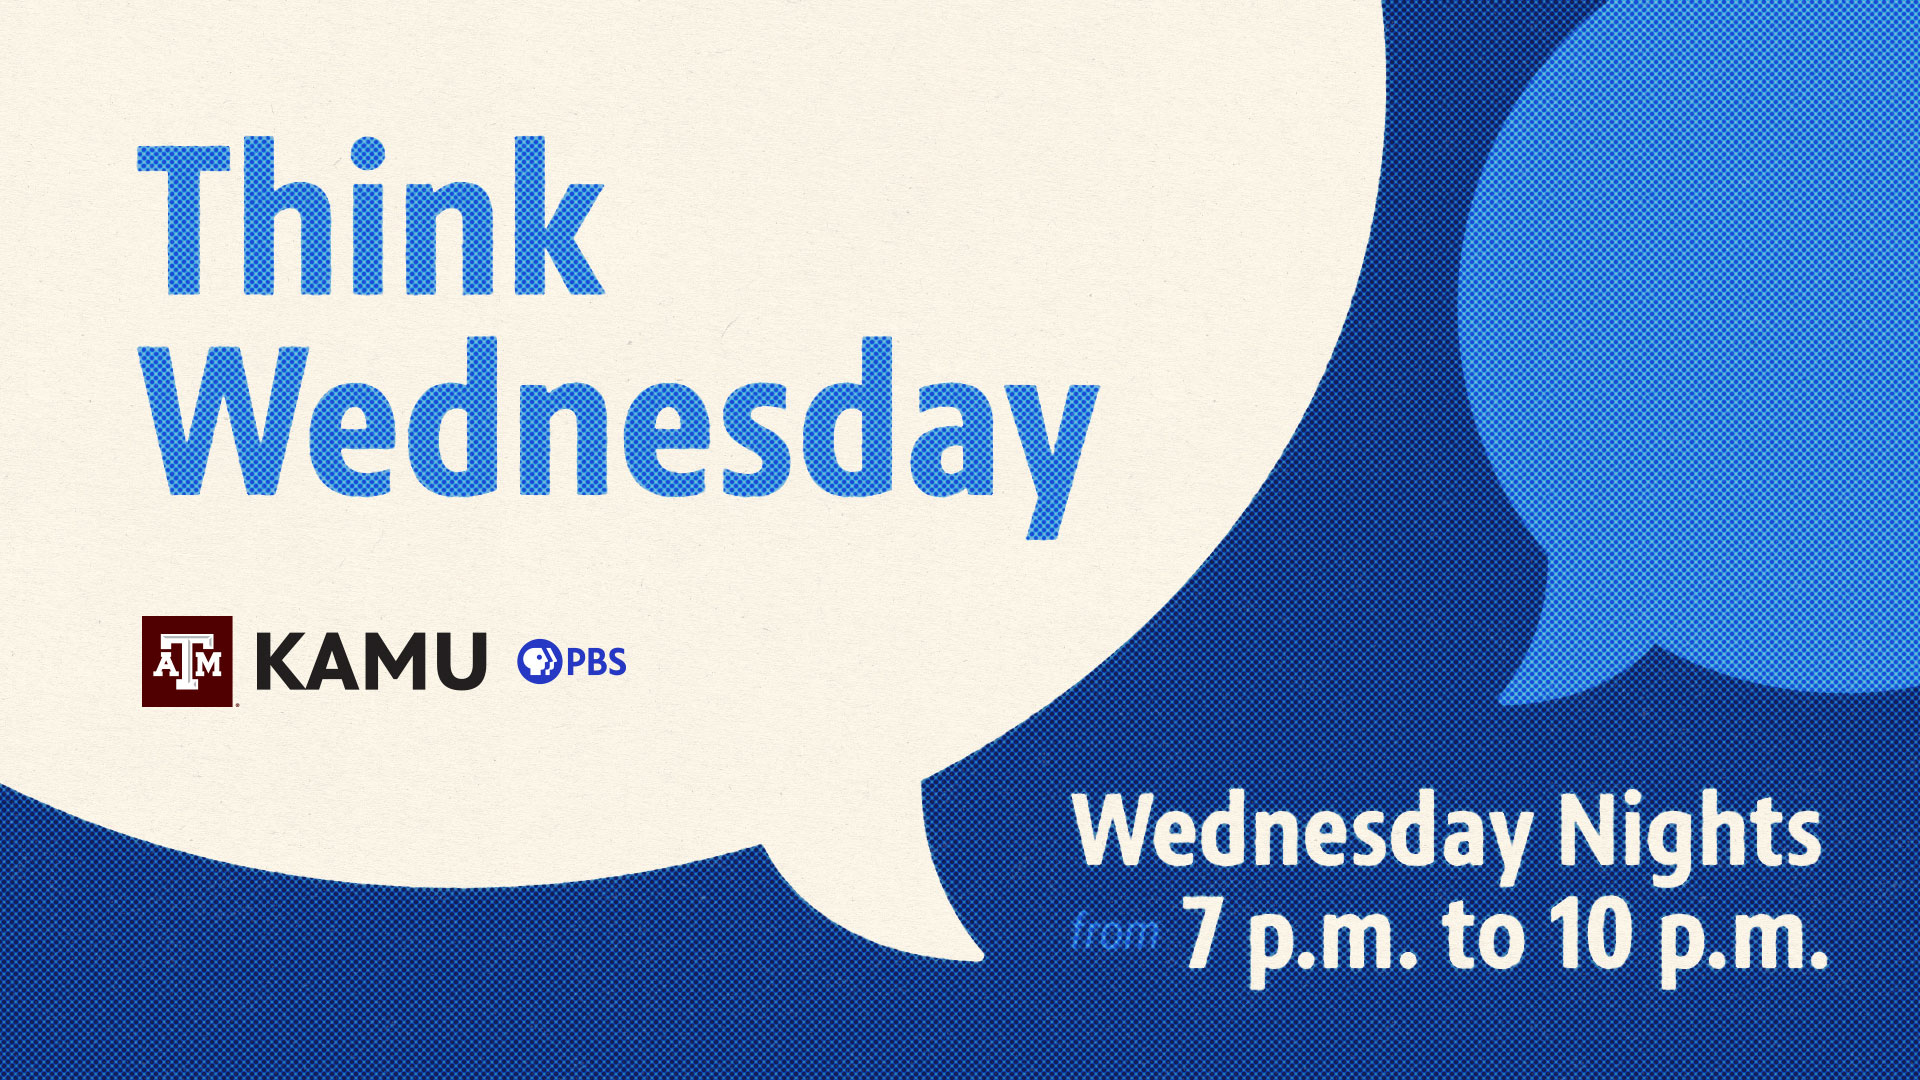 Think Wednesday presented by KAMU and PBS, Wednesday Nights from 7 p.m. to 10 p.m.